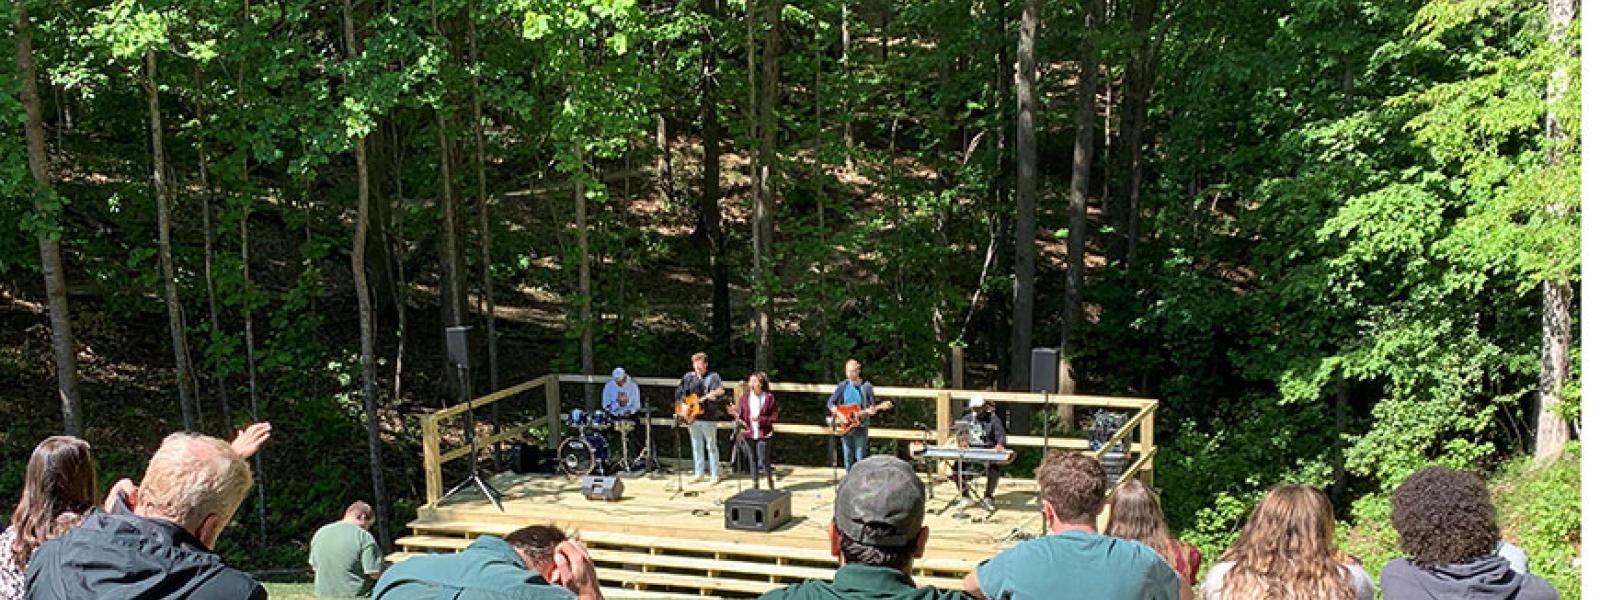 The "Cathedral of Trees." Outdoor worship at the new CIU amphitheater.